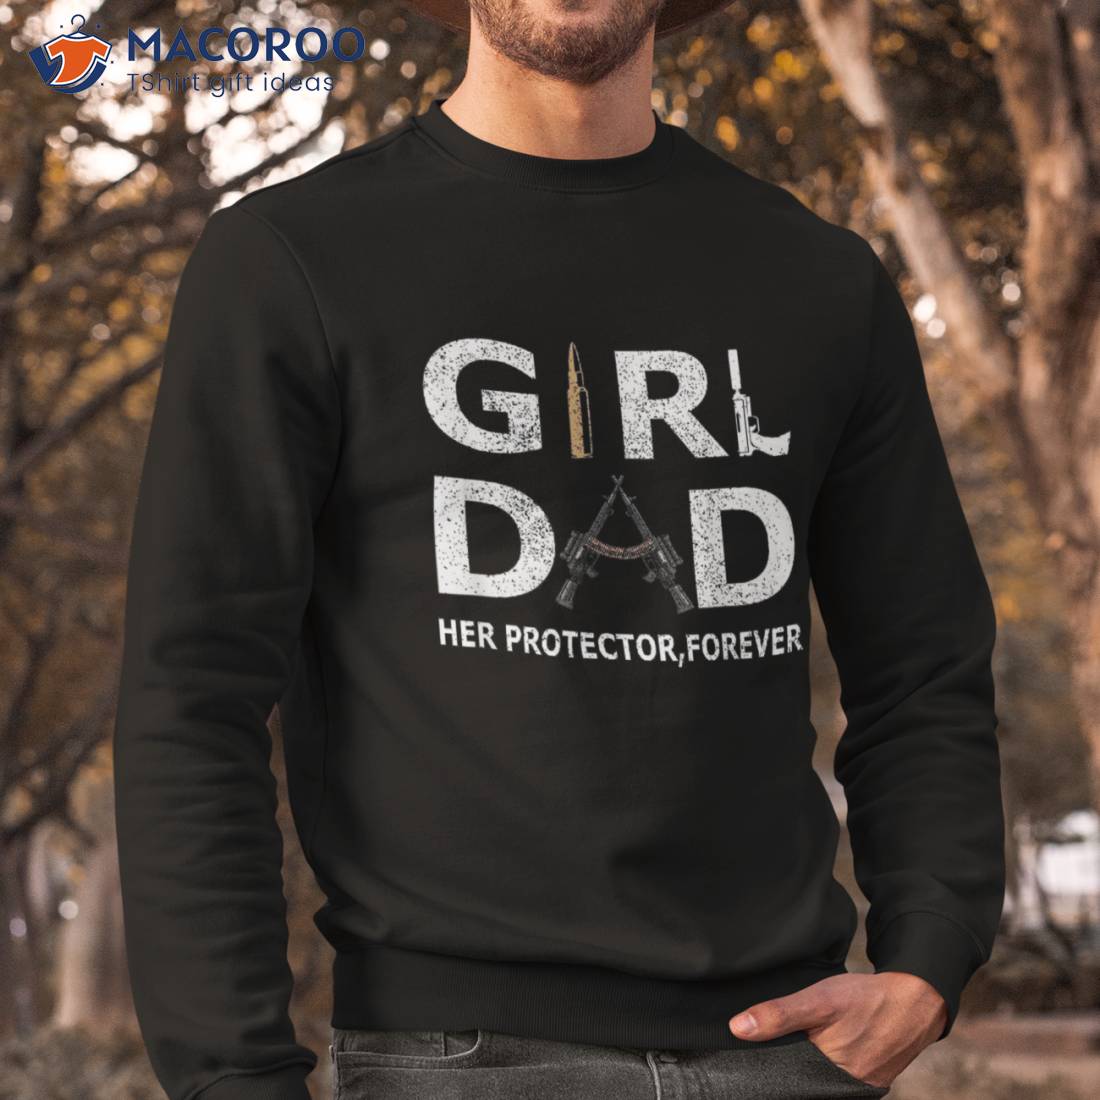 Girl Dad Her Protector Forever Funny Father Of Girls Shirt